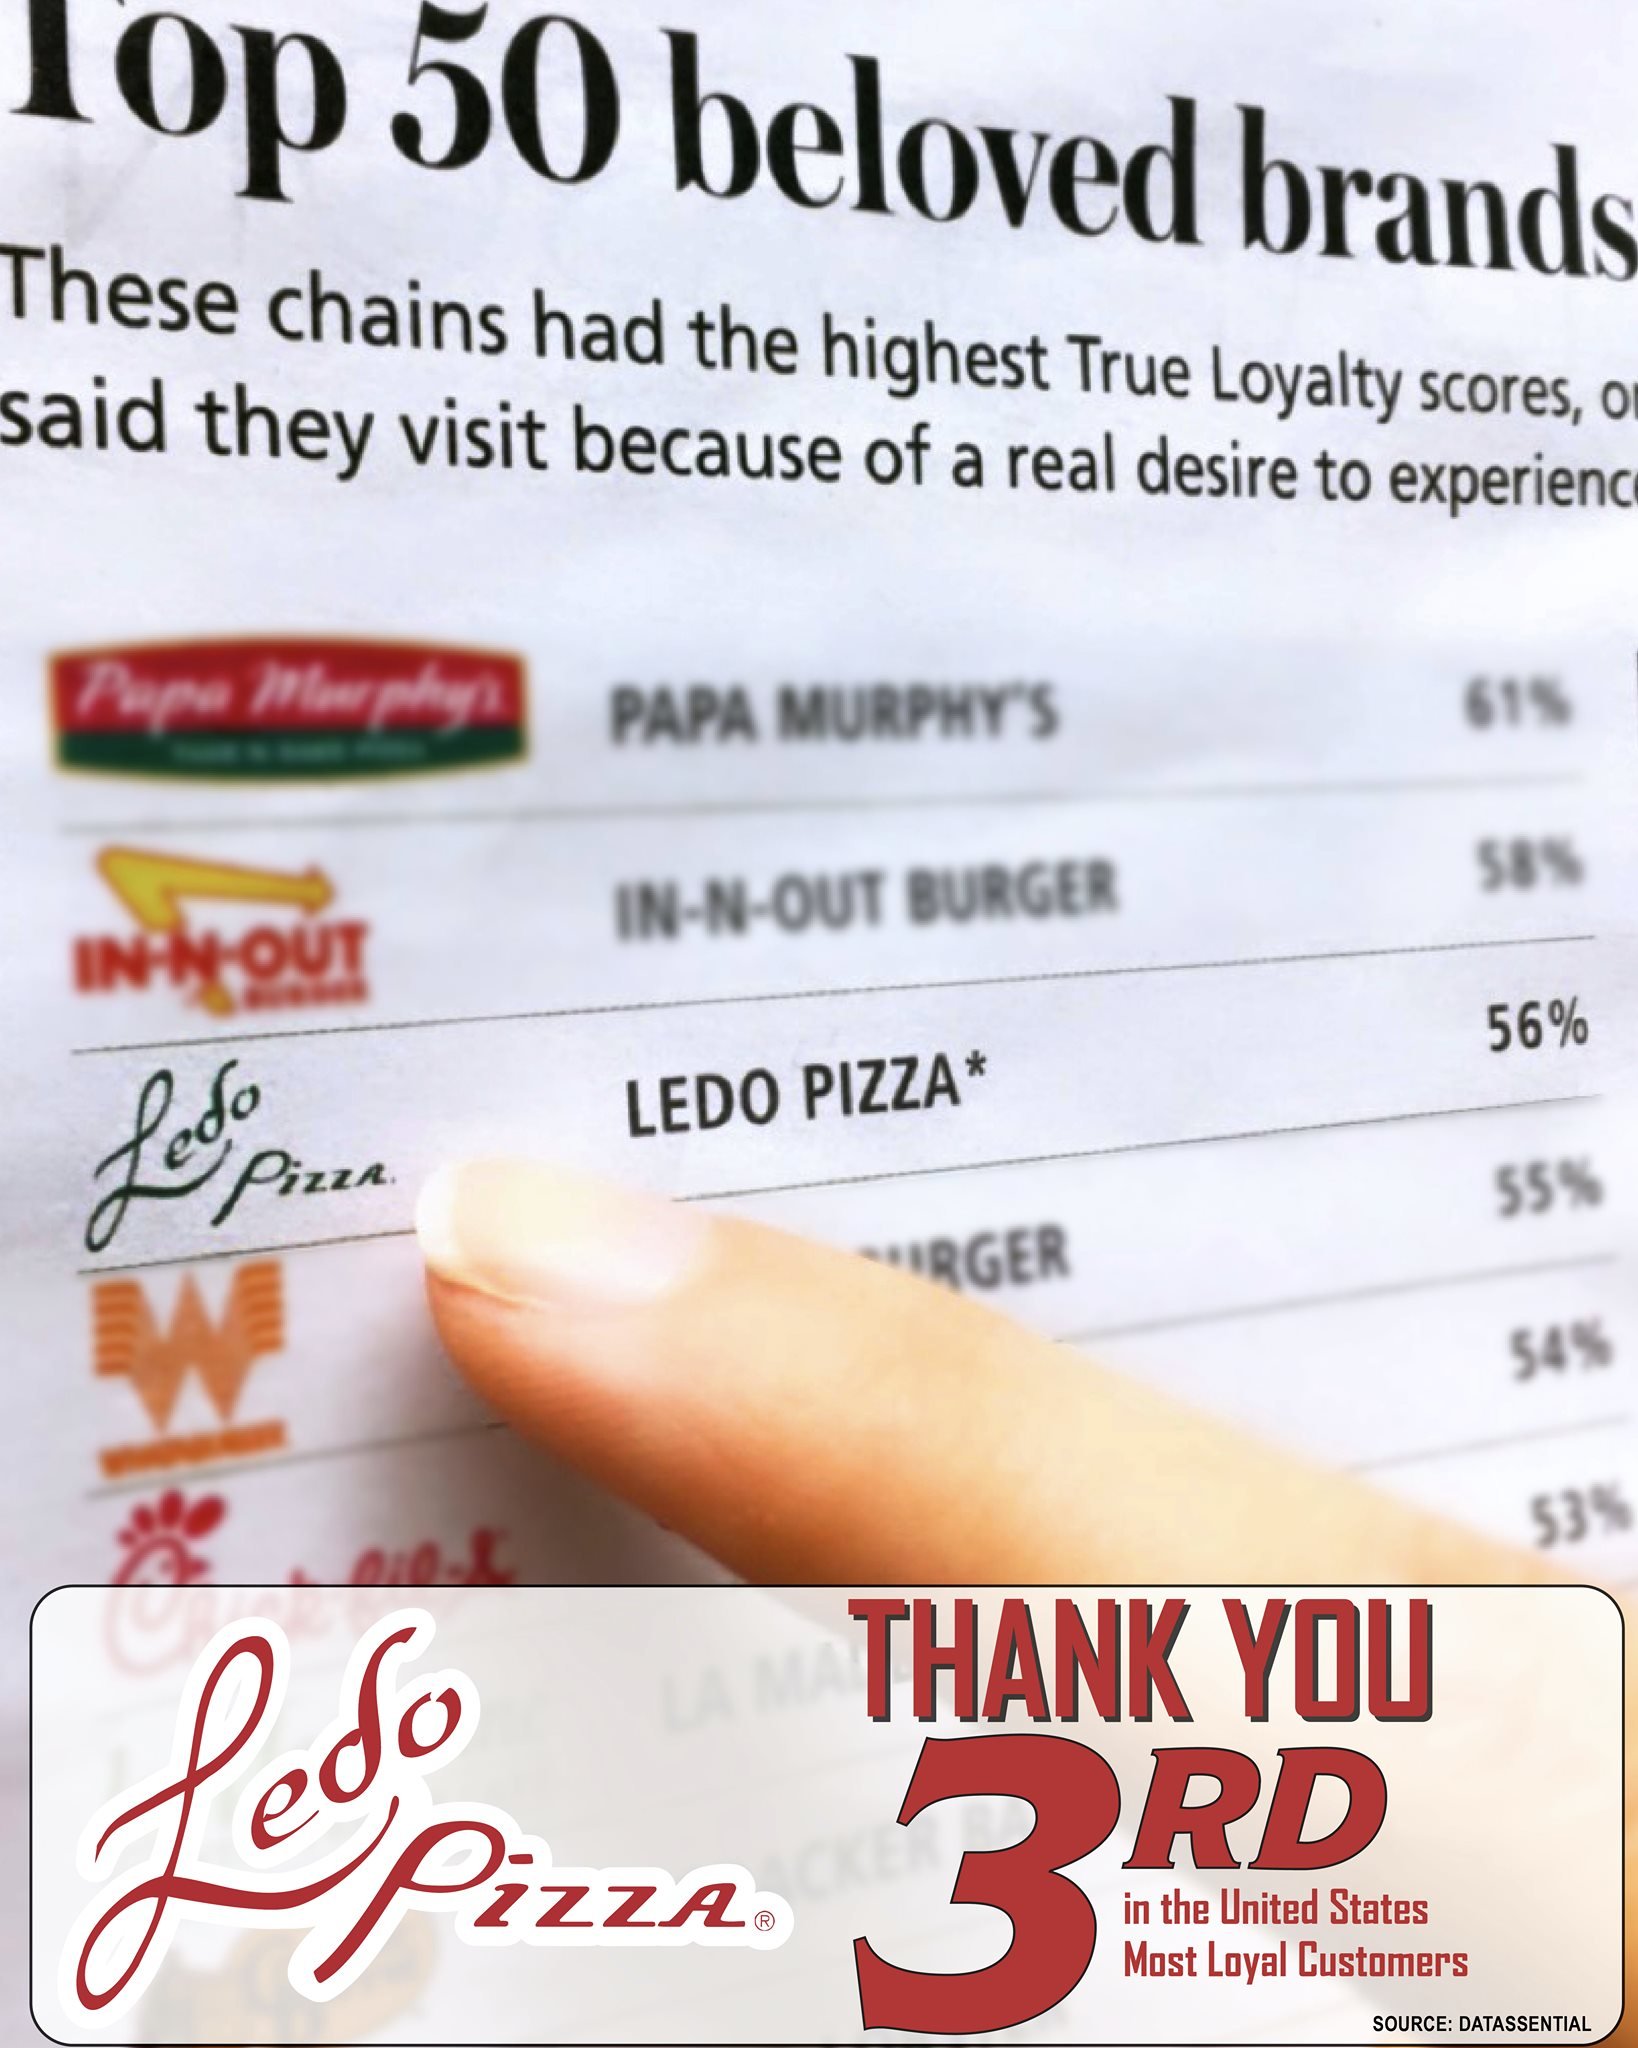 Ledo Pizza listed in an article of Top 50 beloved brands with a finger pointing at it